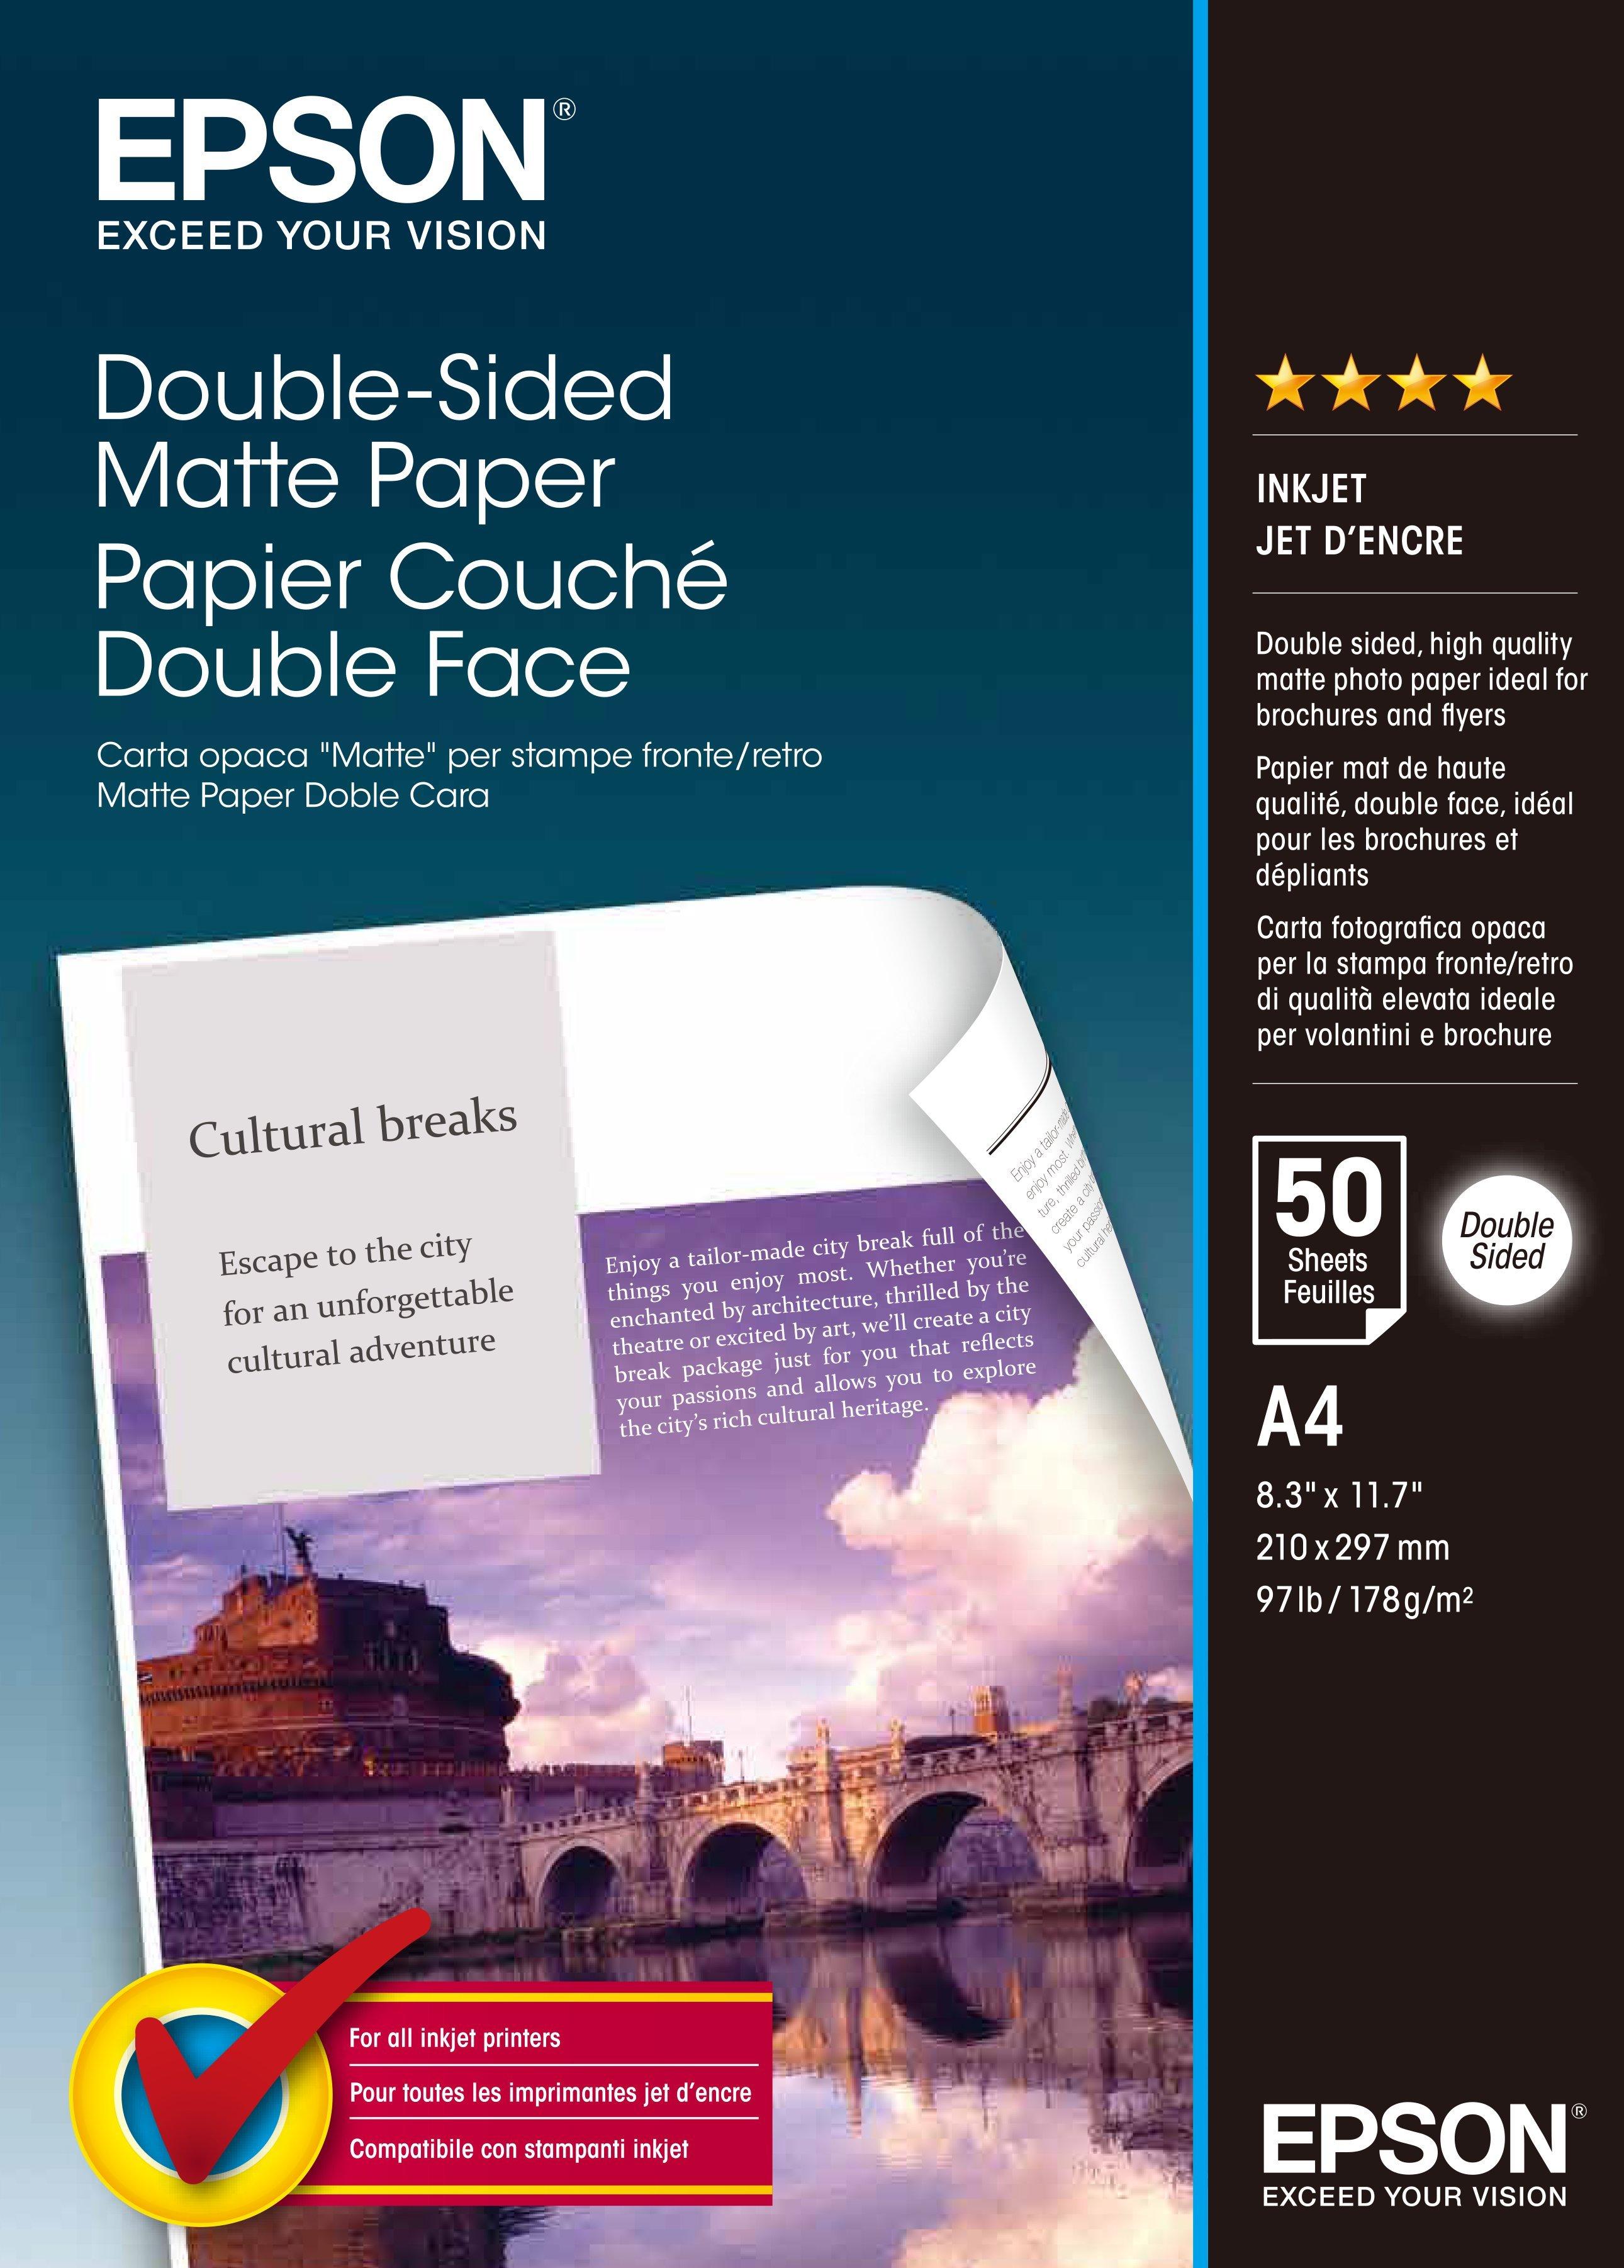 Double Sided Matte Paper - A4 - 50 Sheets, Paper and Media, Ink & Paper, Products